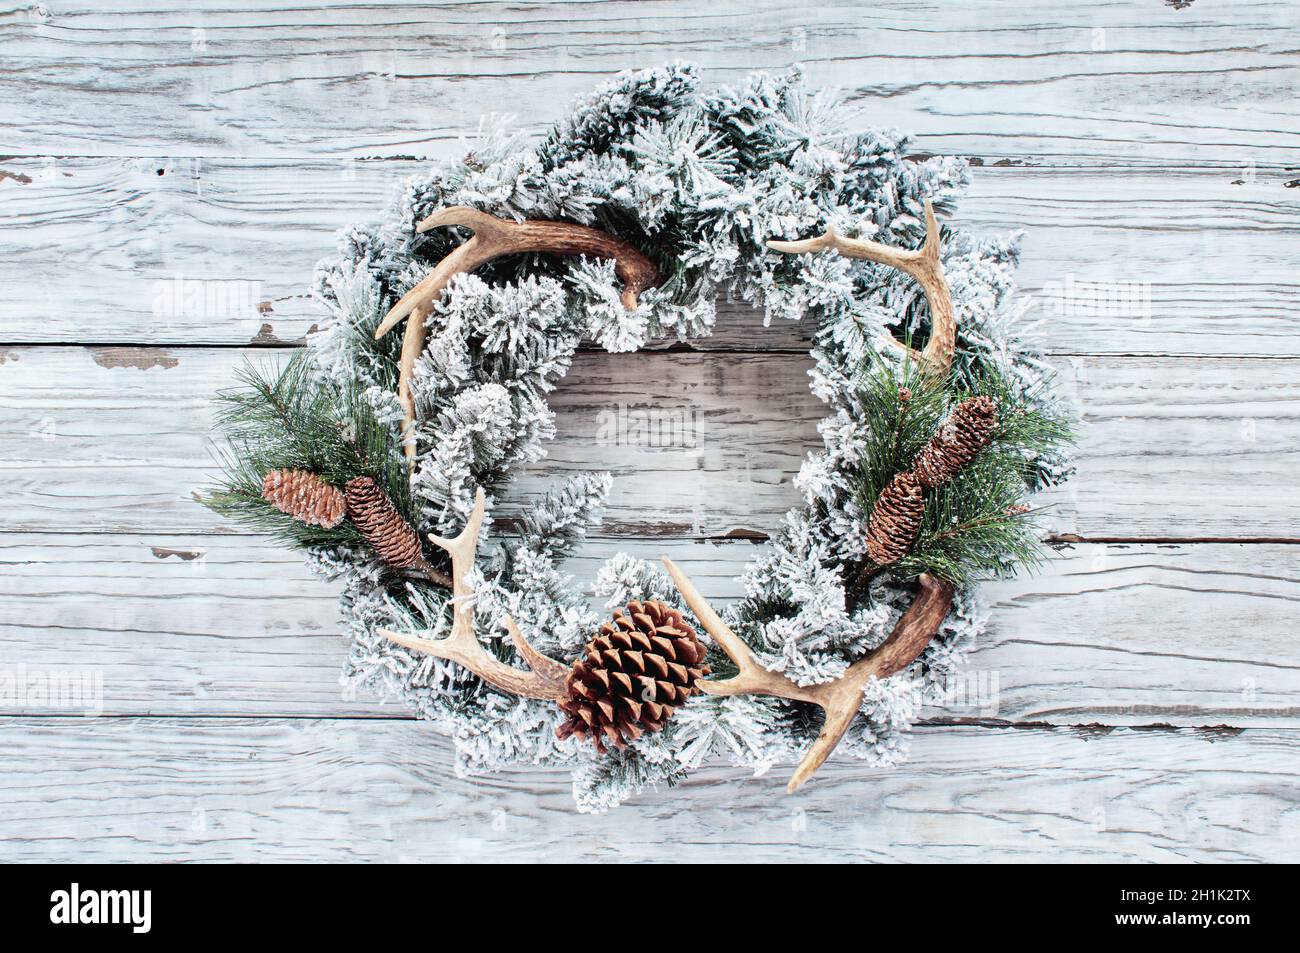 Flocked stylish country or hunters Christmas wreath over white wooden table background.  Wreath is made with pine cones, branches, and deer antlers. Stock Photo